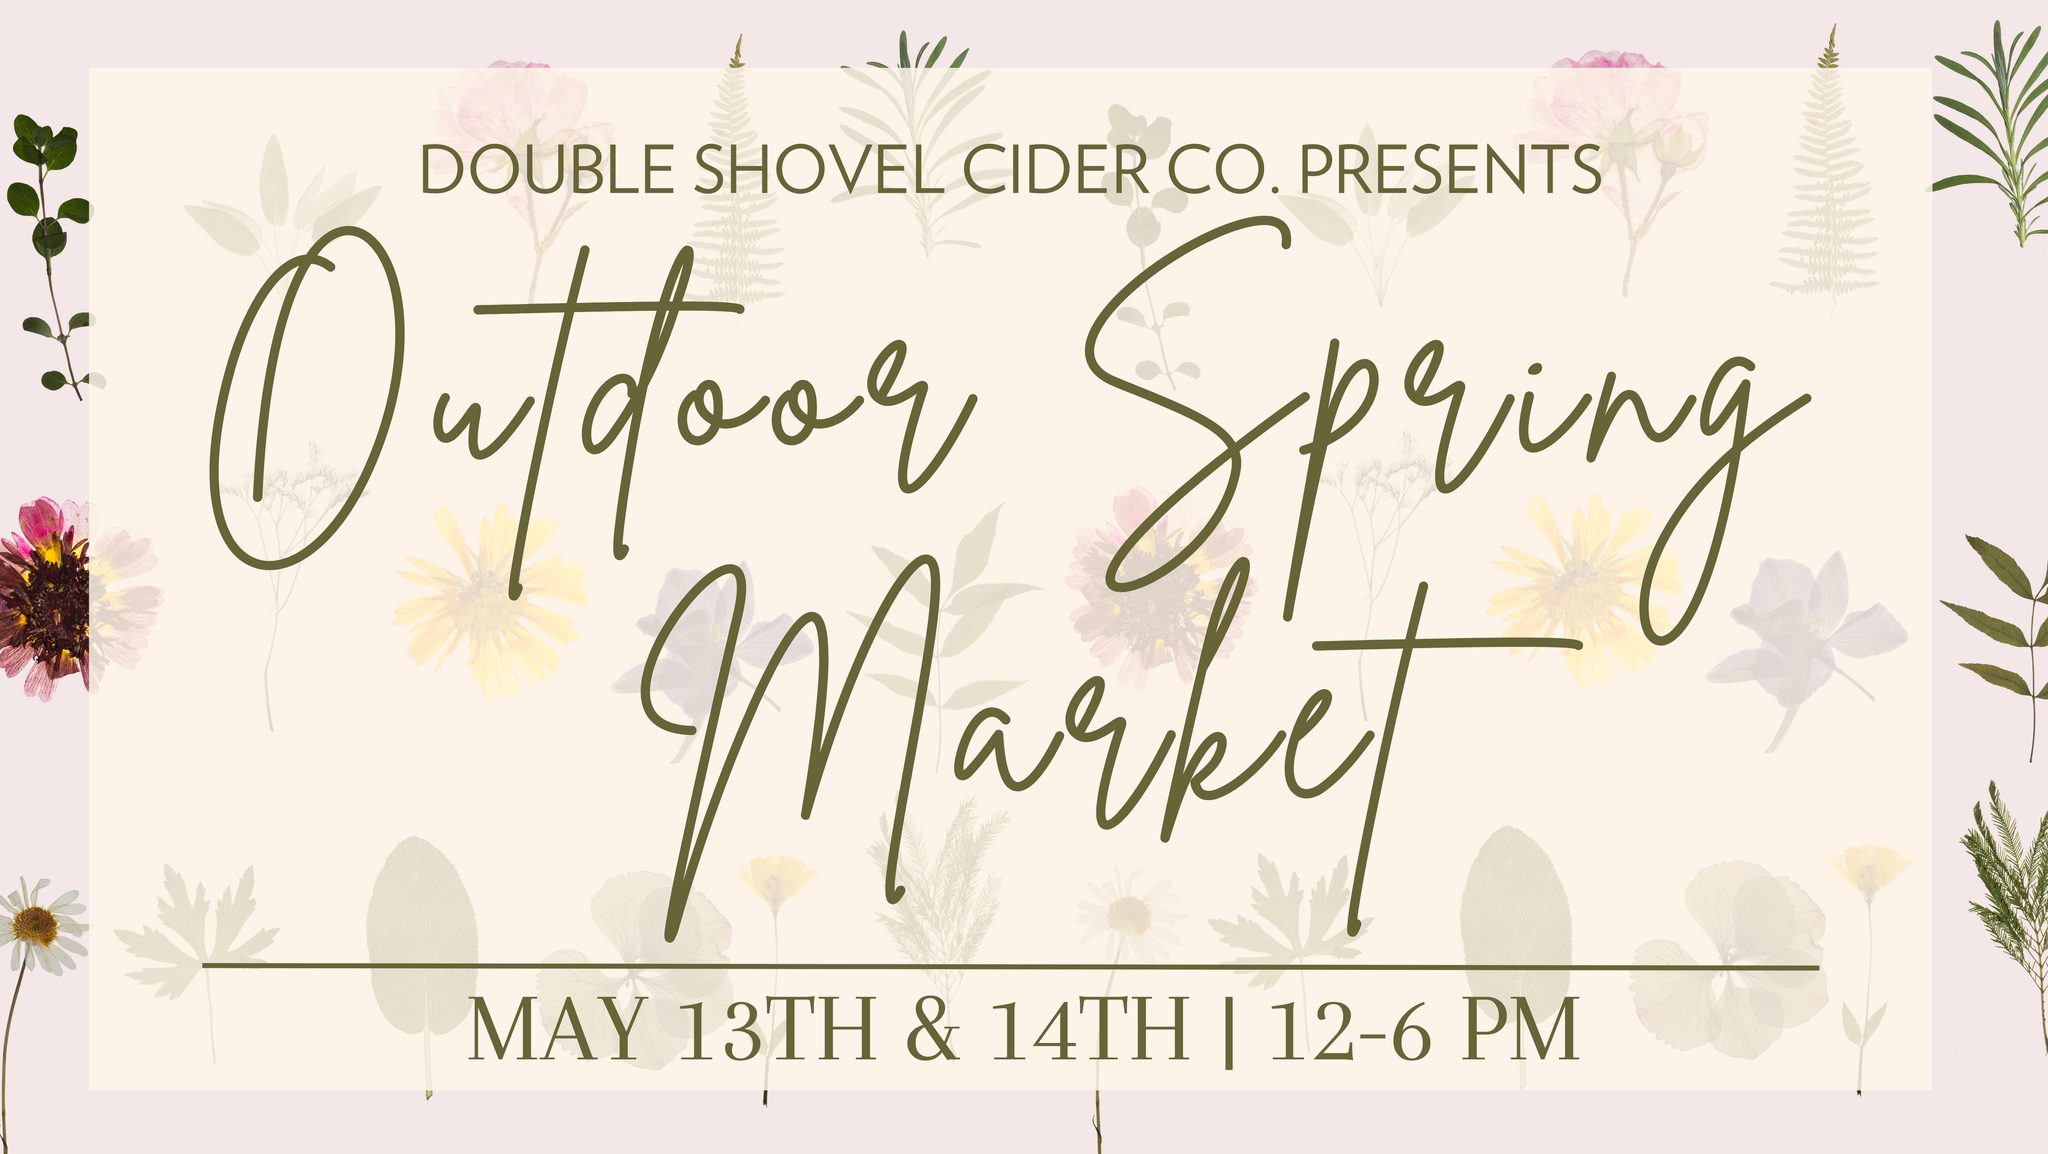 Outdoor Spring Market - Mothers Day Weekend (Sat & Sun)